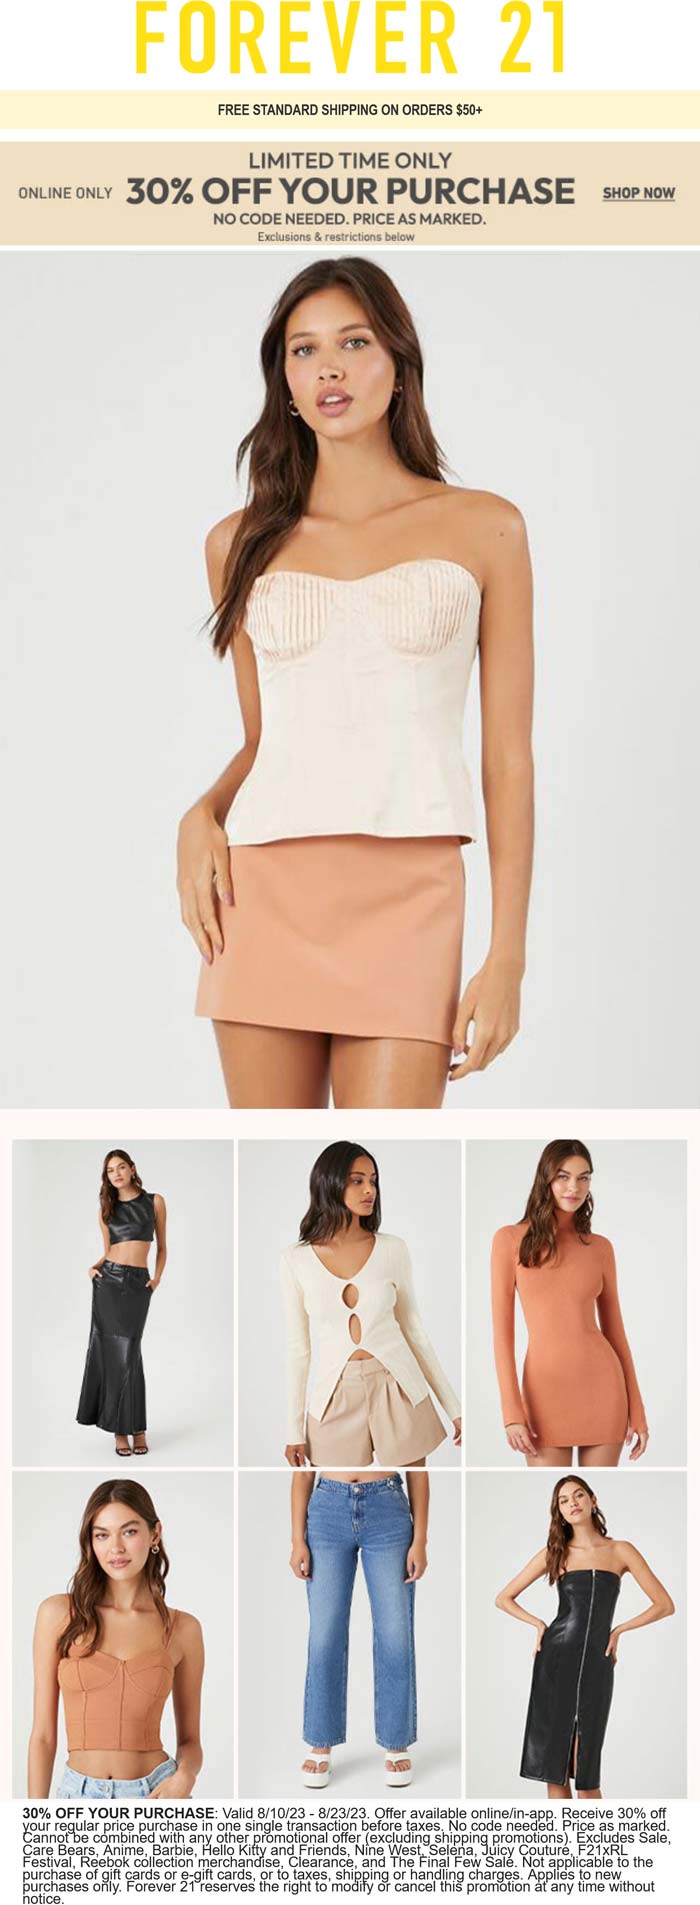 Forever 21 stores Coupon  30% off online at Forever 21 #forever21 